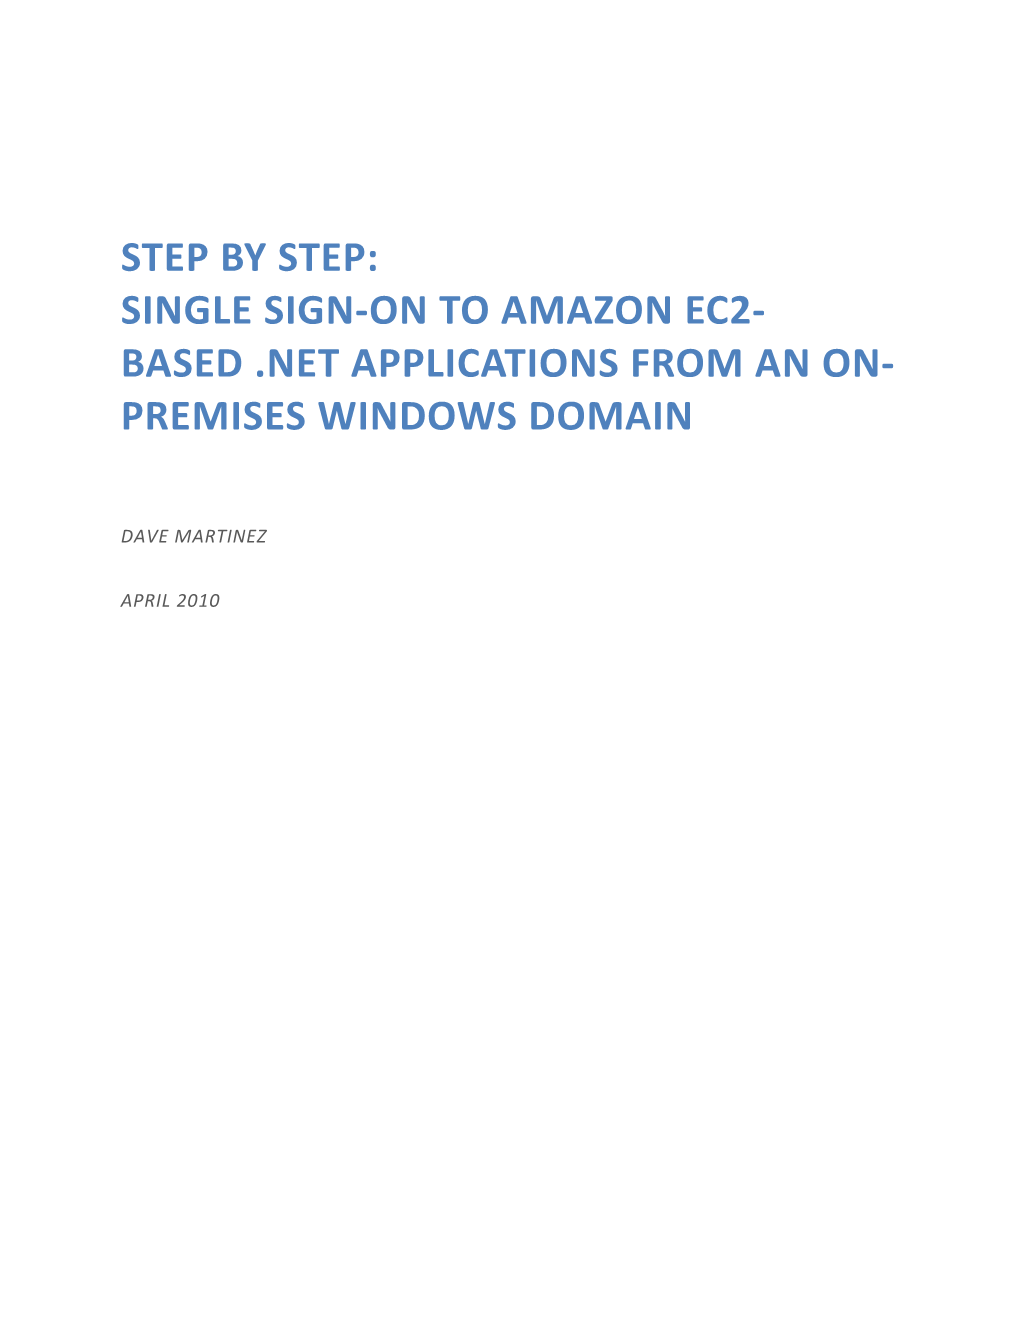 Step by Step: Single Sign-On to Amazon EC2-Based .NET Applications from an On-Premises